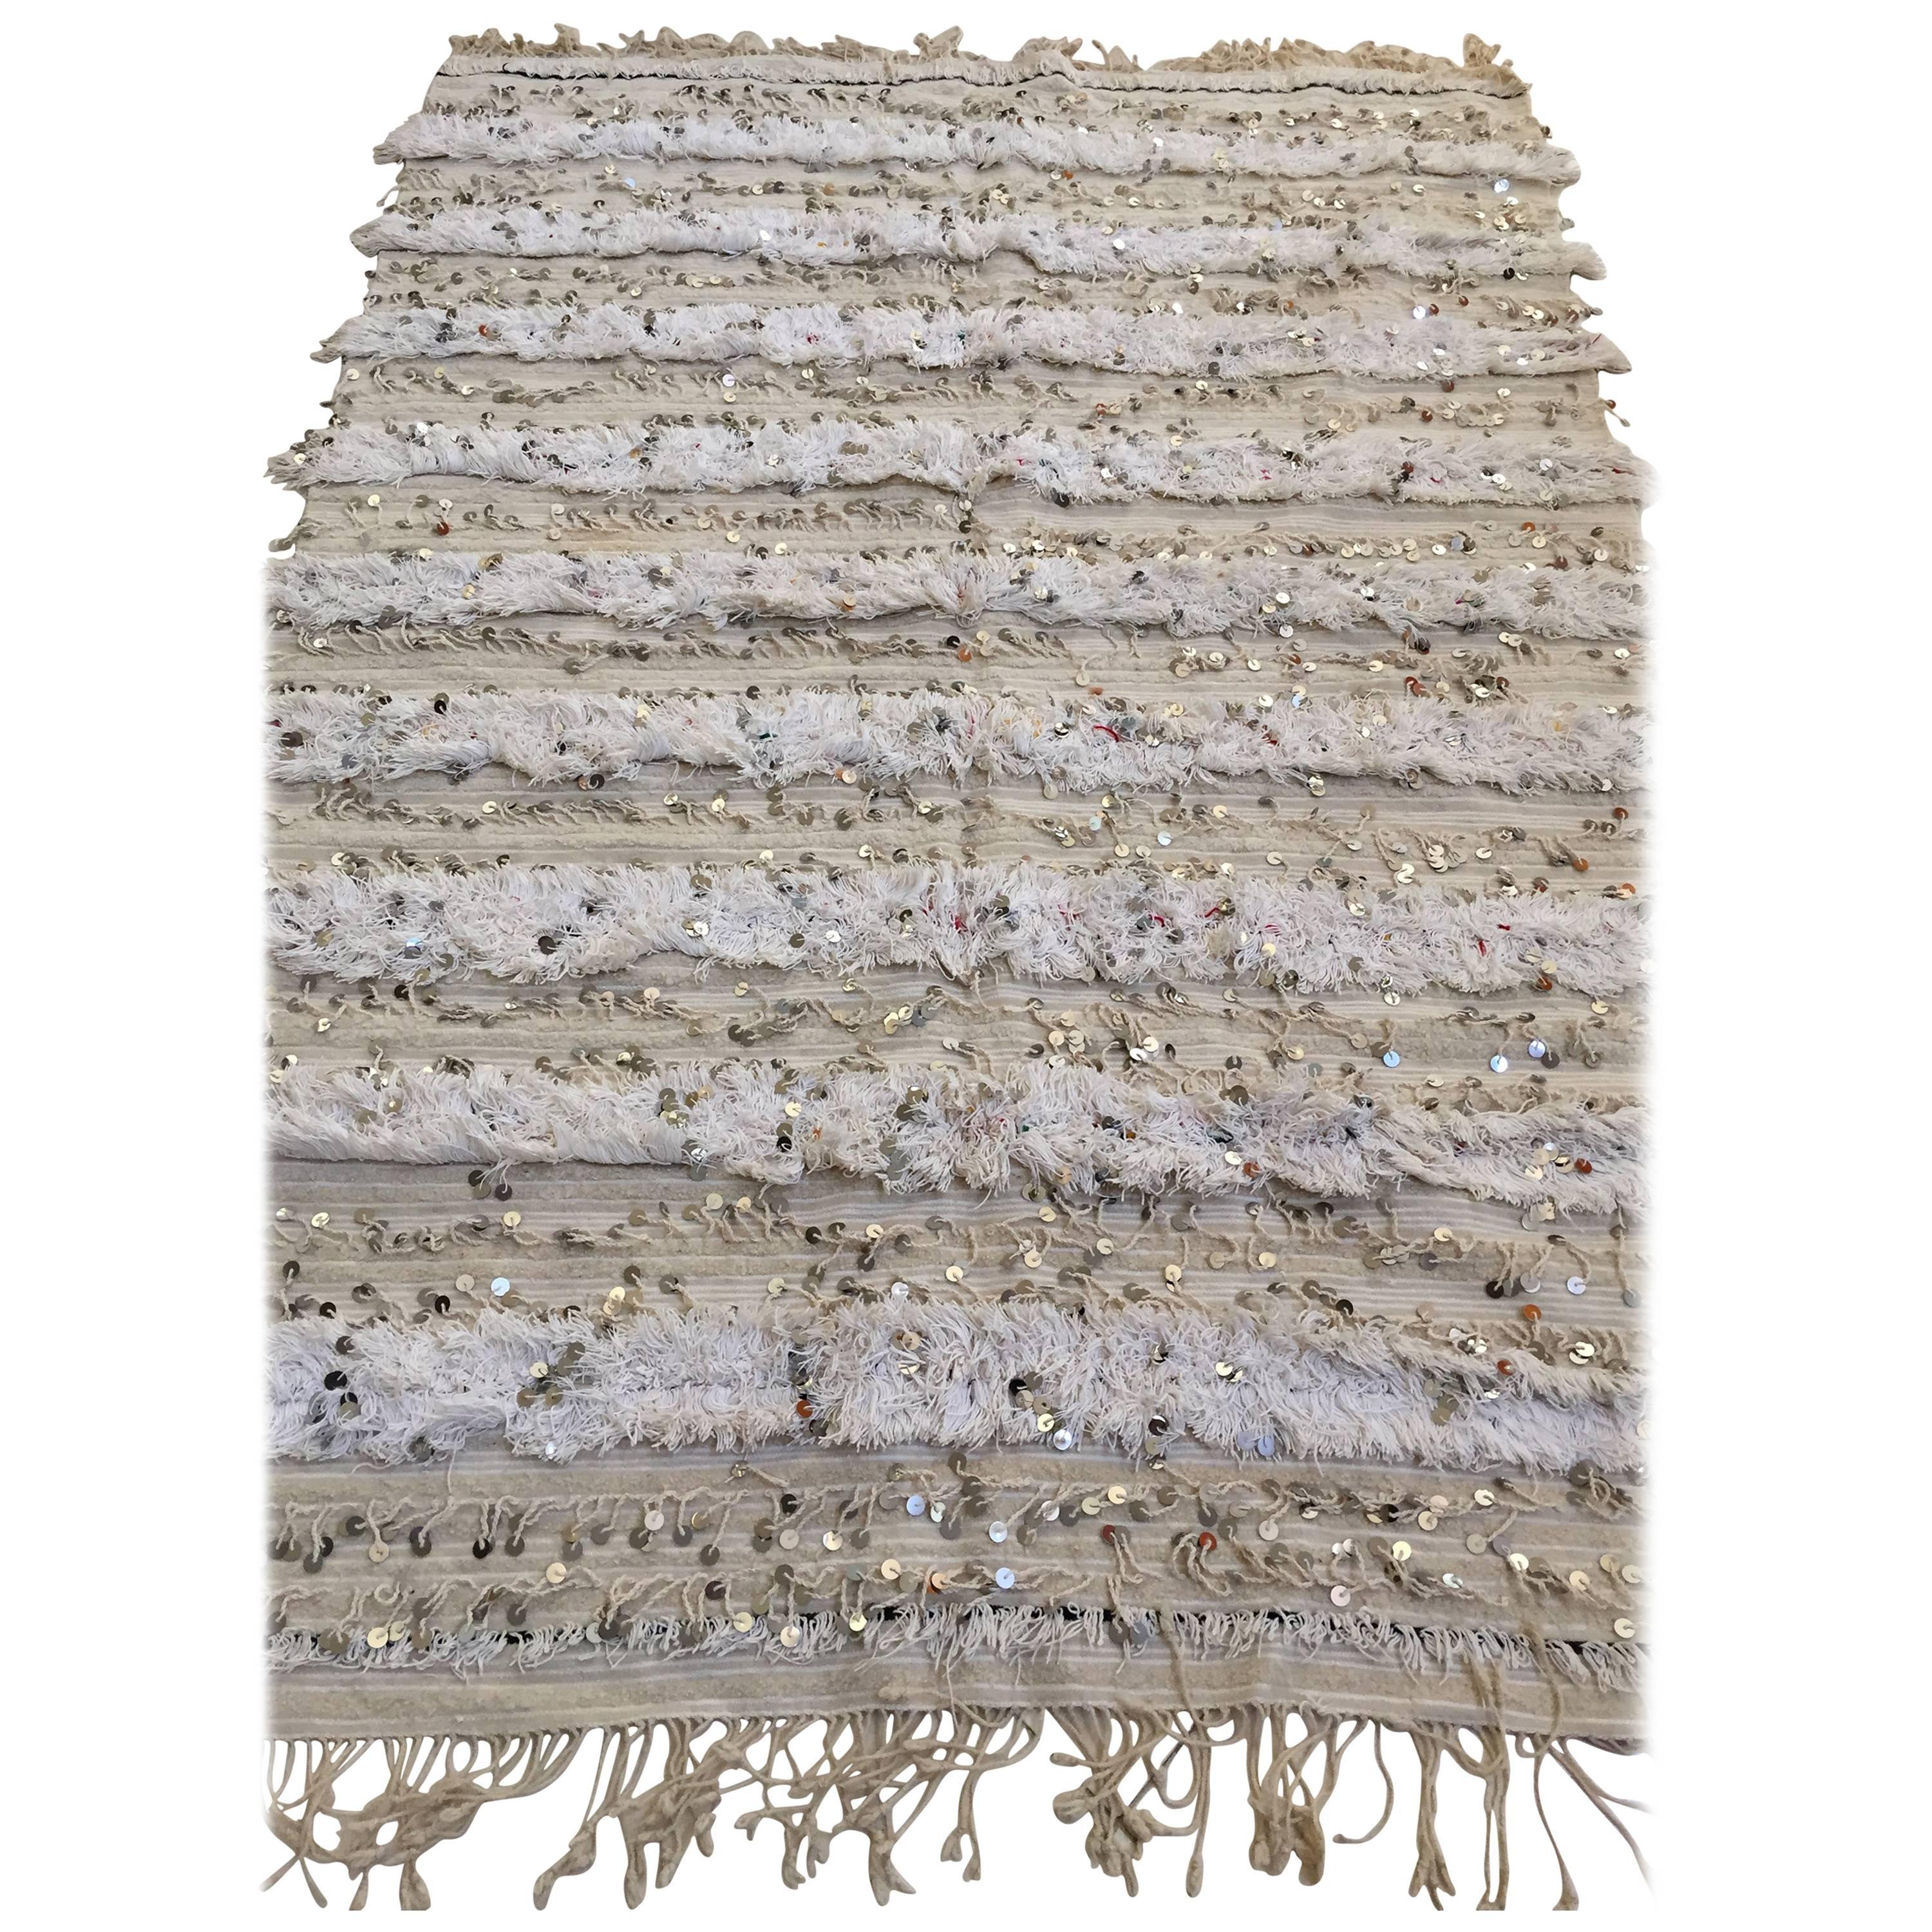 Moroccan Vintage Wedding Blanket with Silver Sequins and Long Fringes